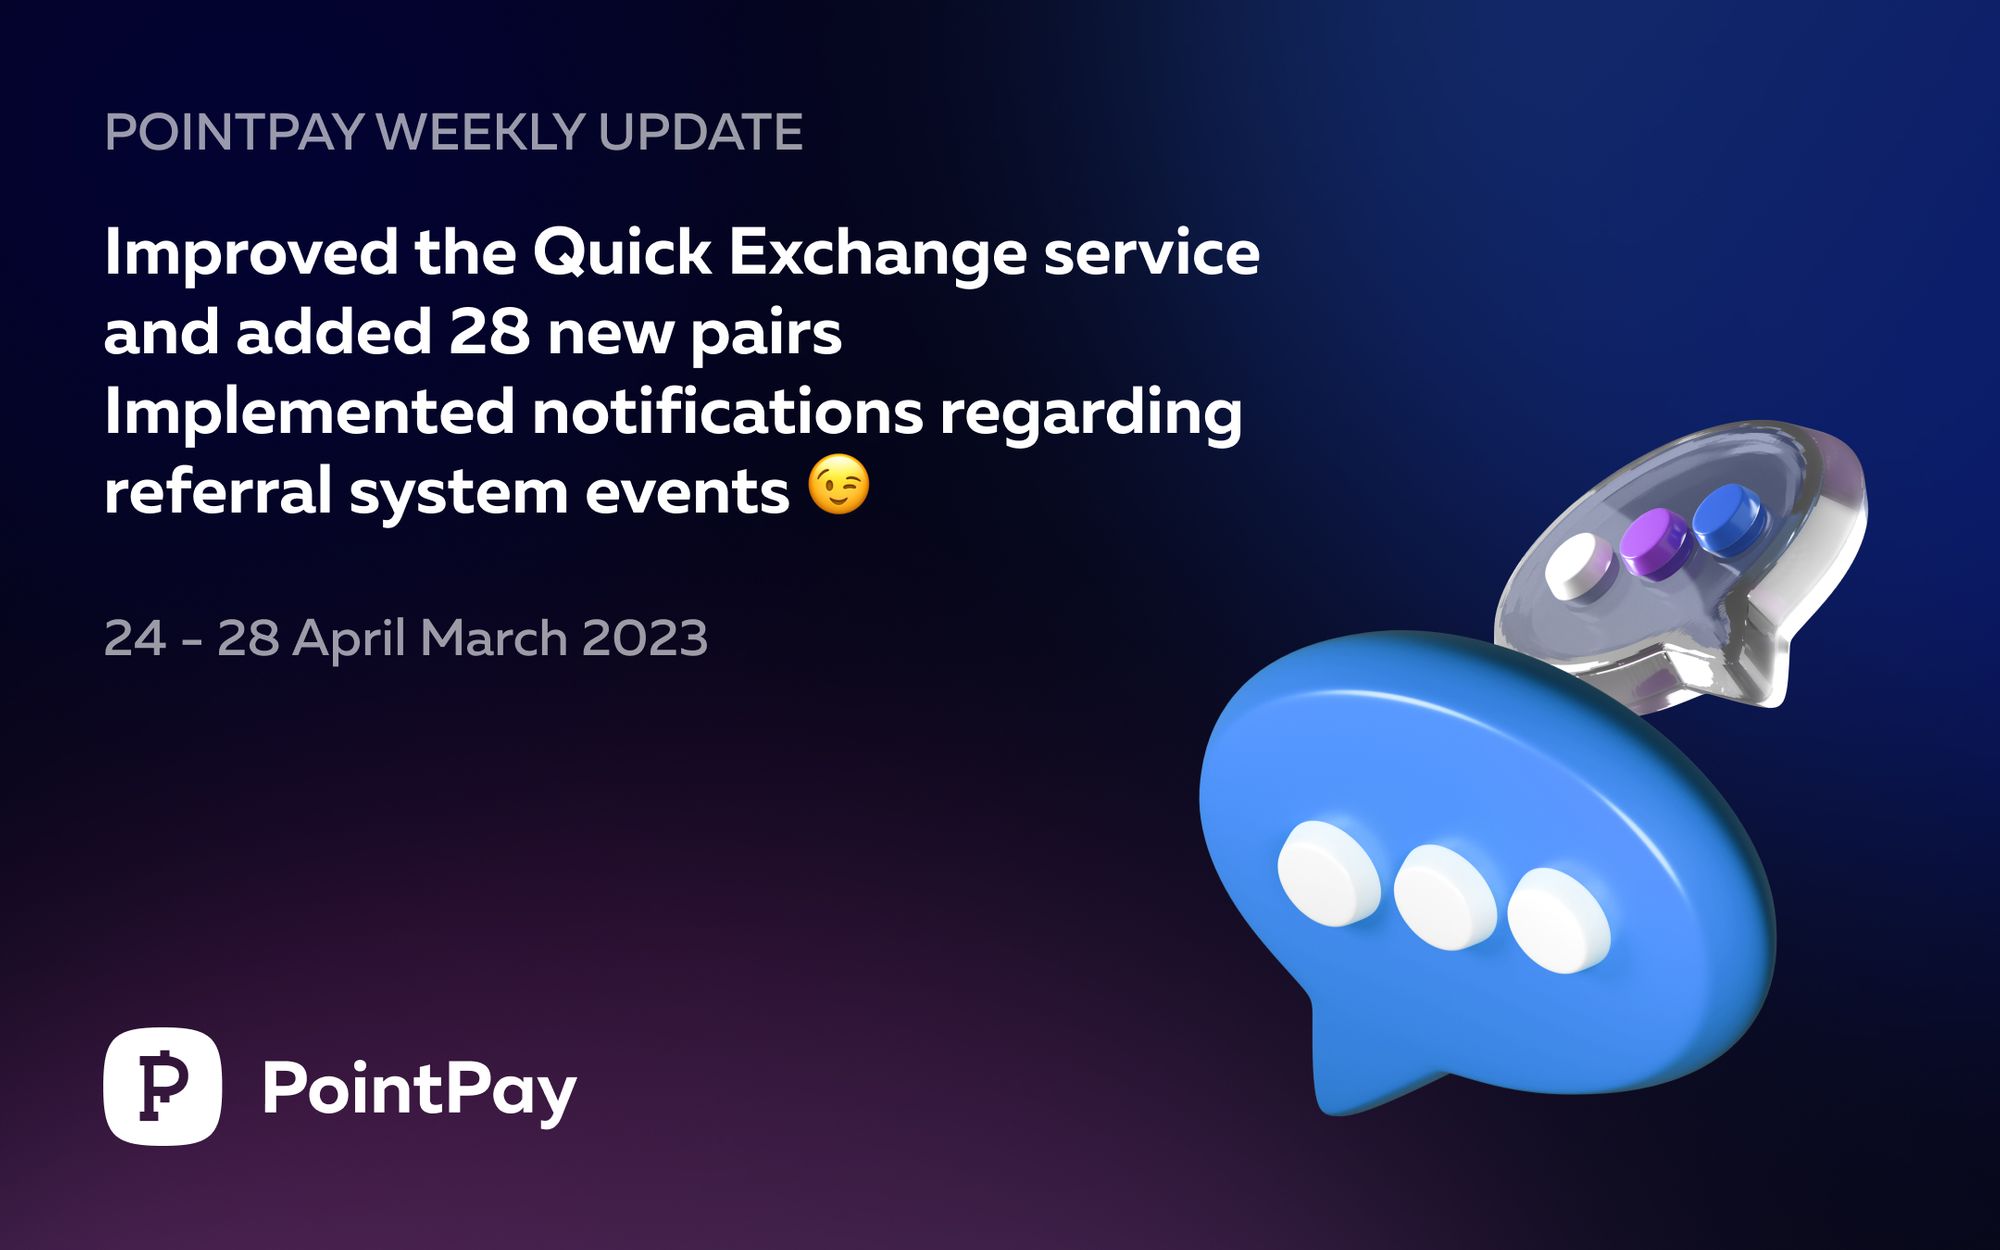 PointPay Weekly Update (24 - 28 April 2023)